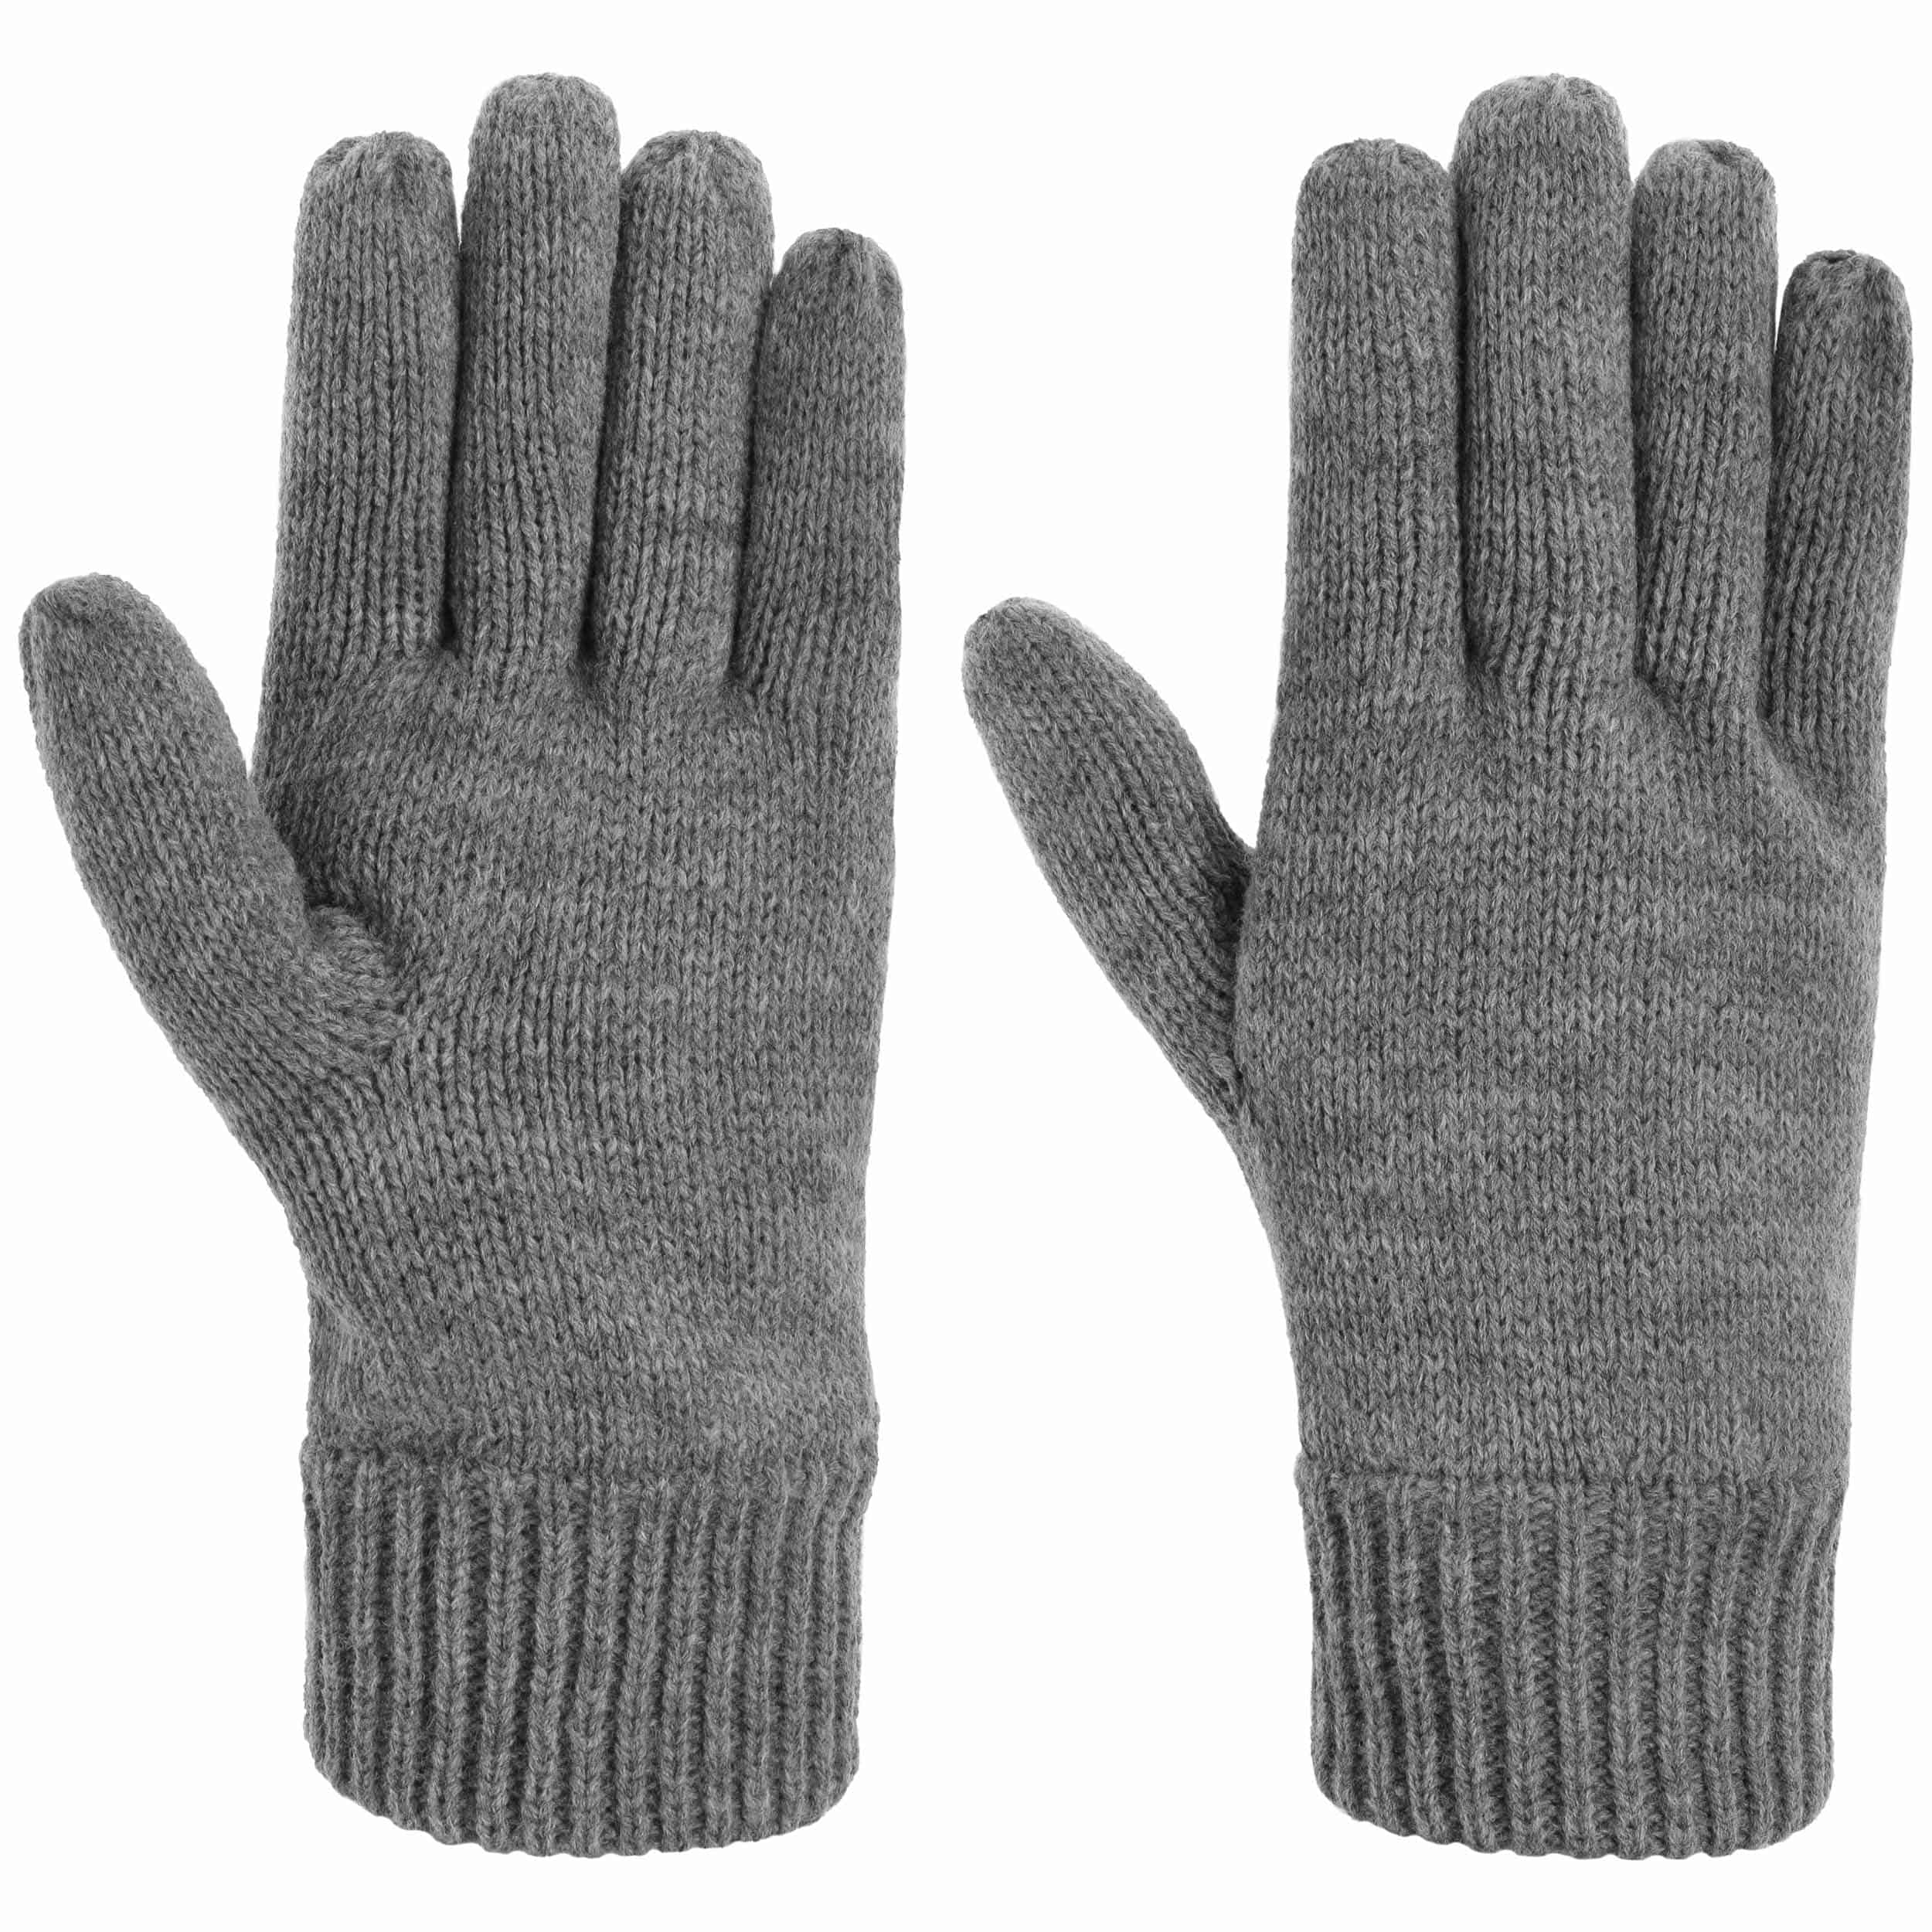 by Gloves 19,95 Knit € 3M Thinsulate - Lipodo